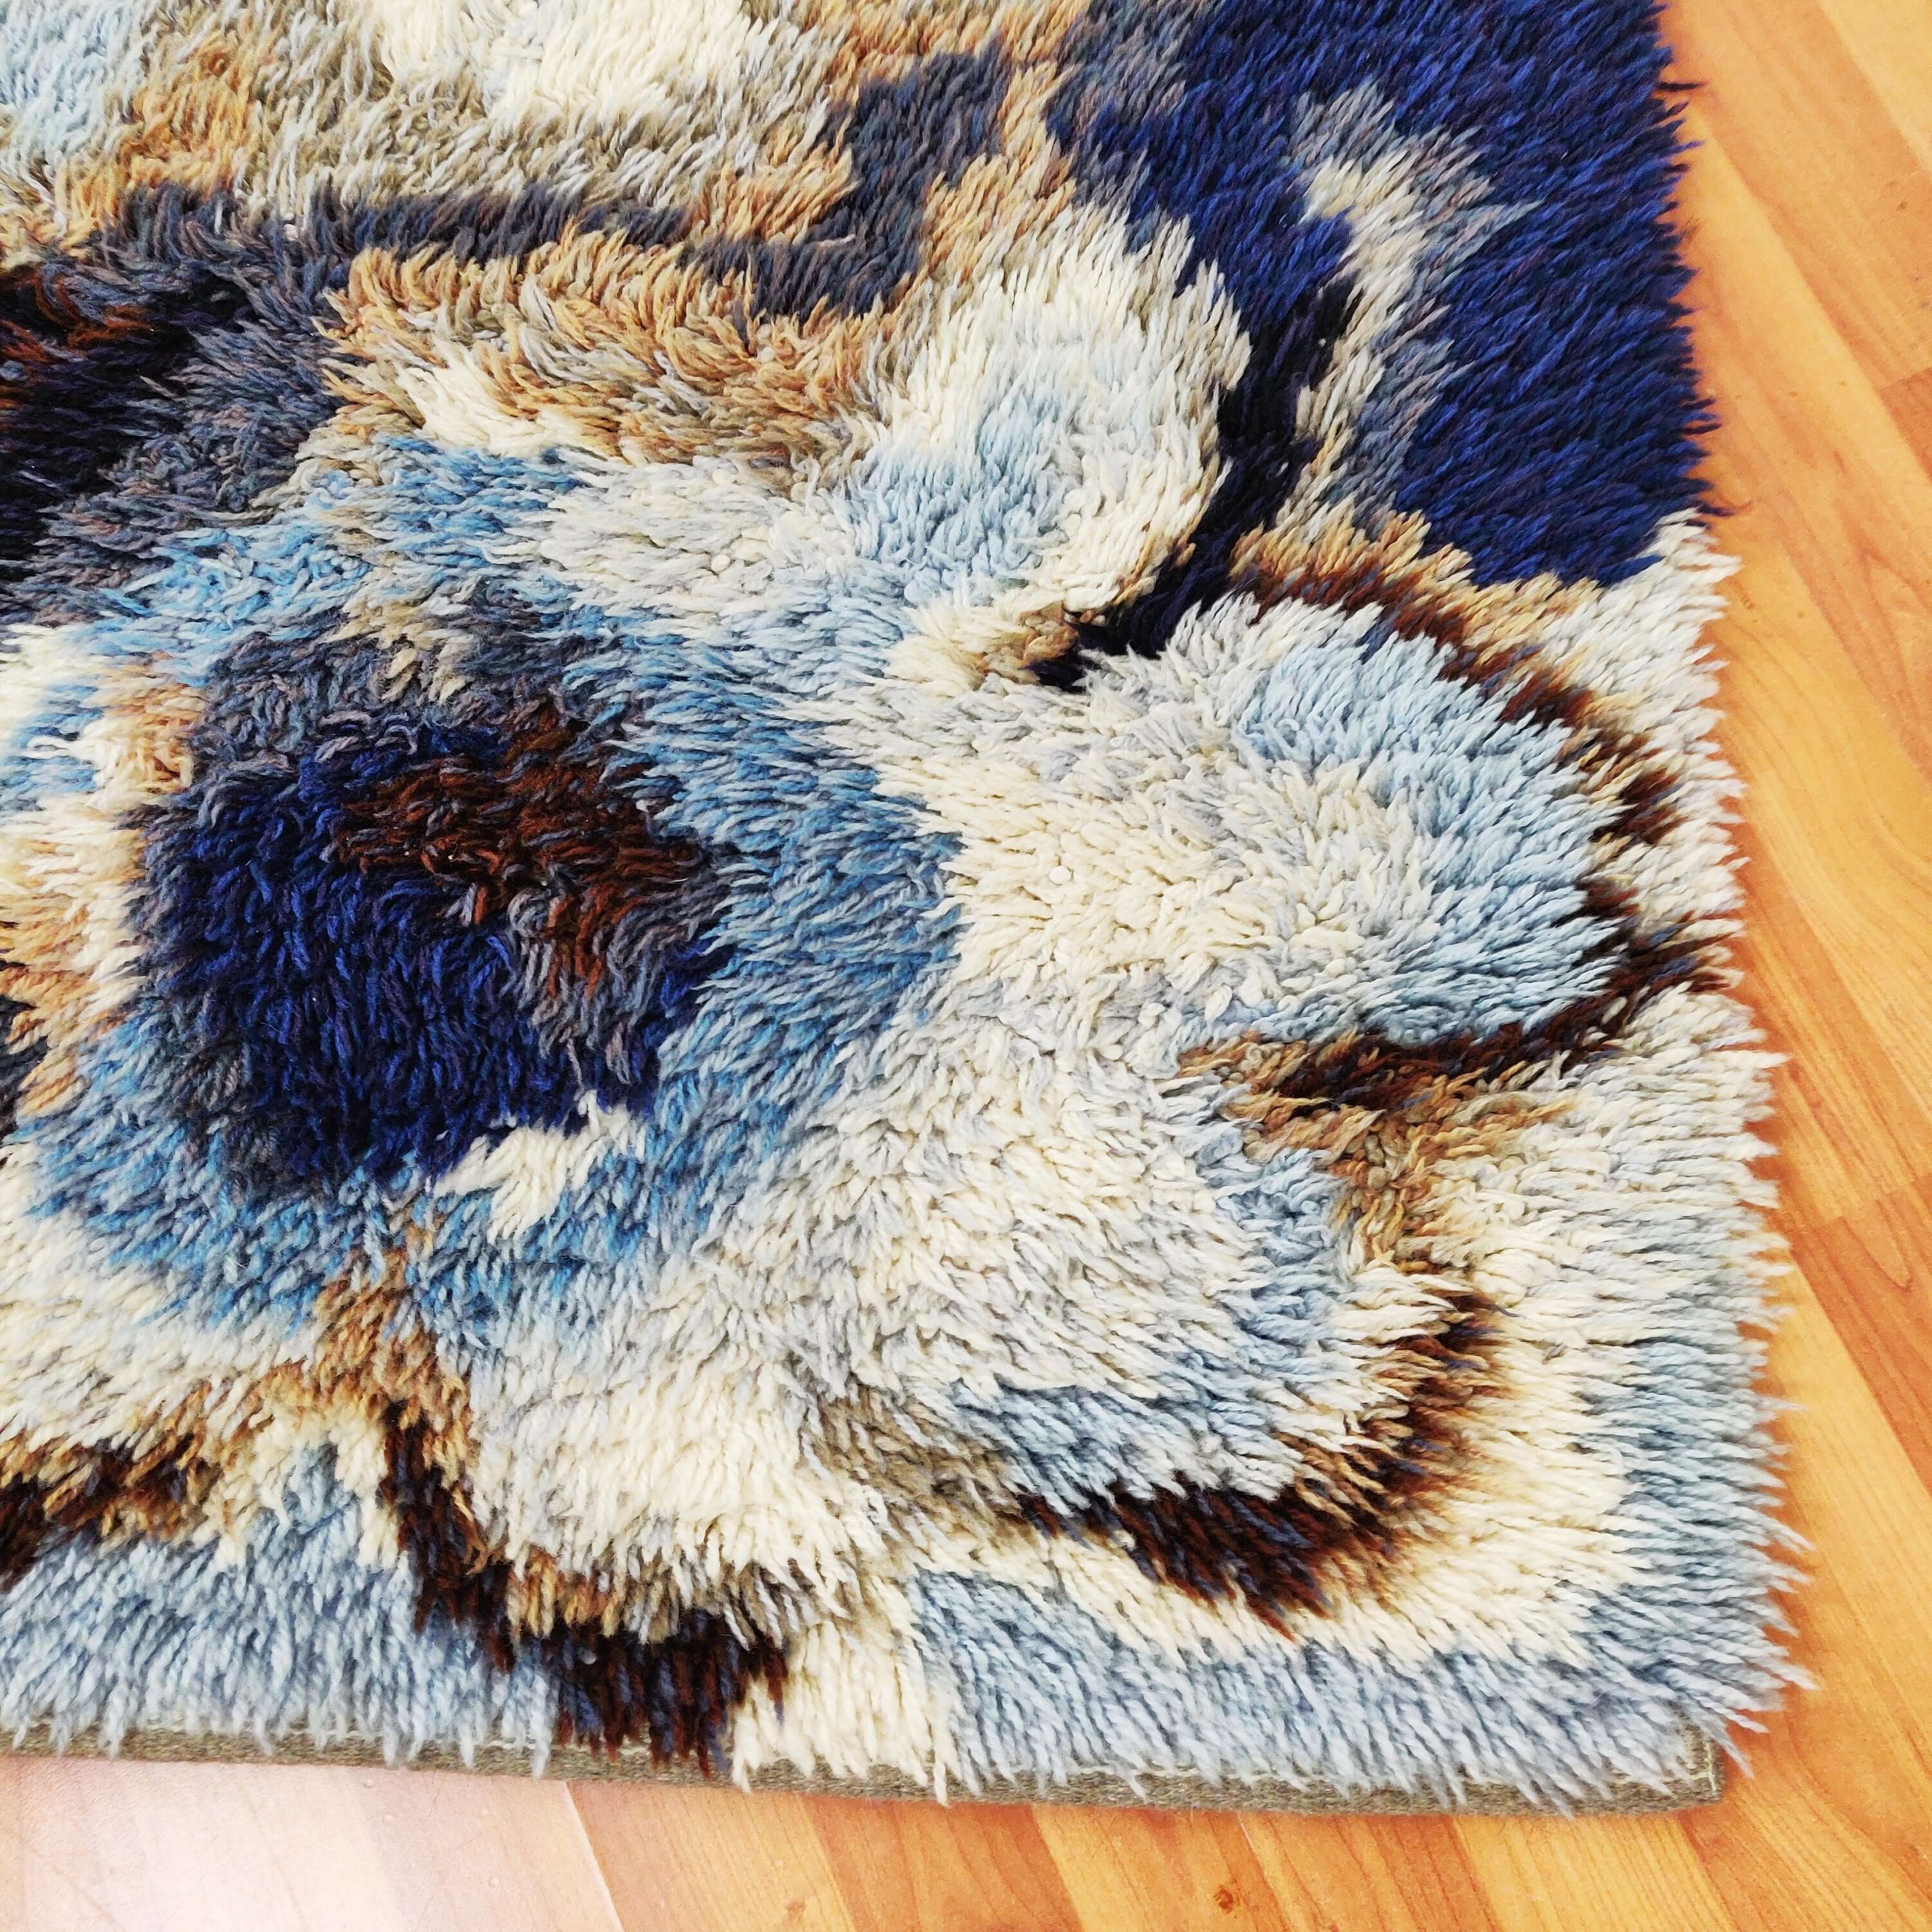 Mid Century Rug close up flower ornament view